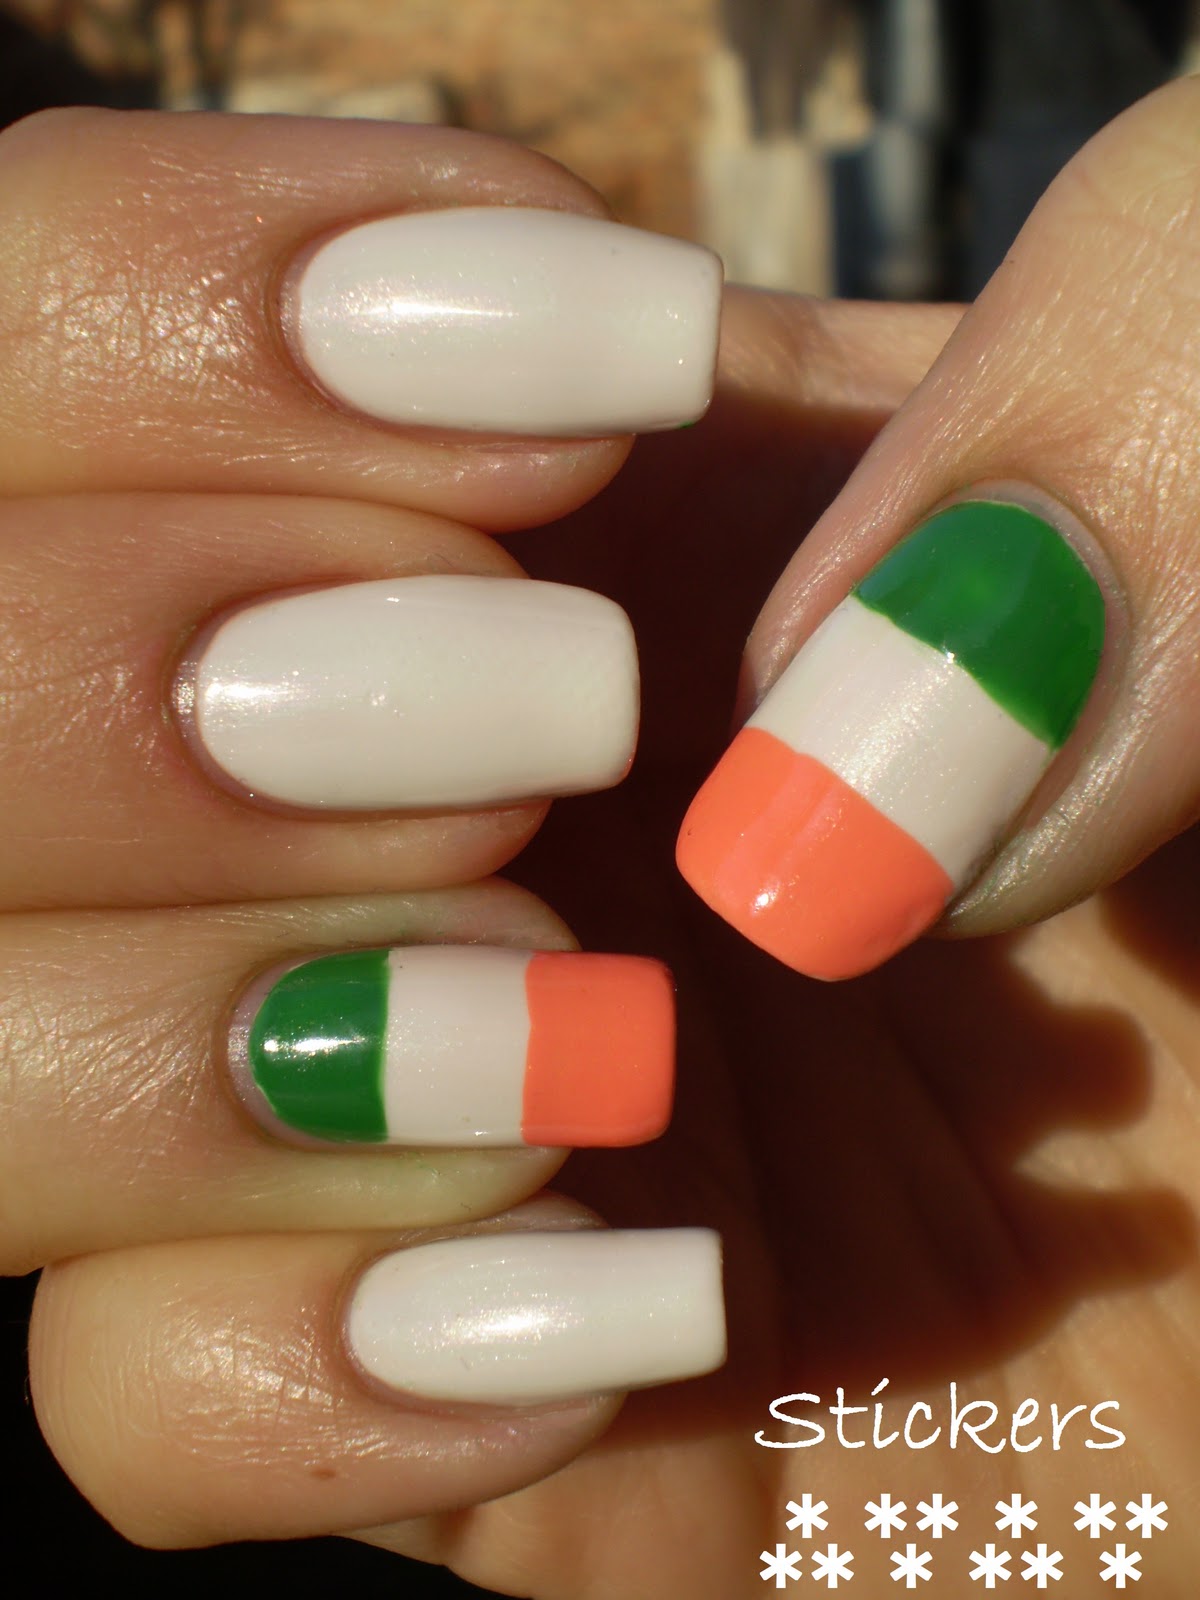 Nails, wanted!: Day 28. Inspired by a flag